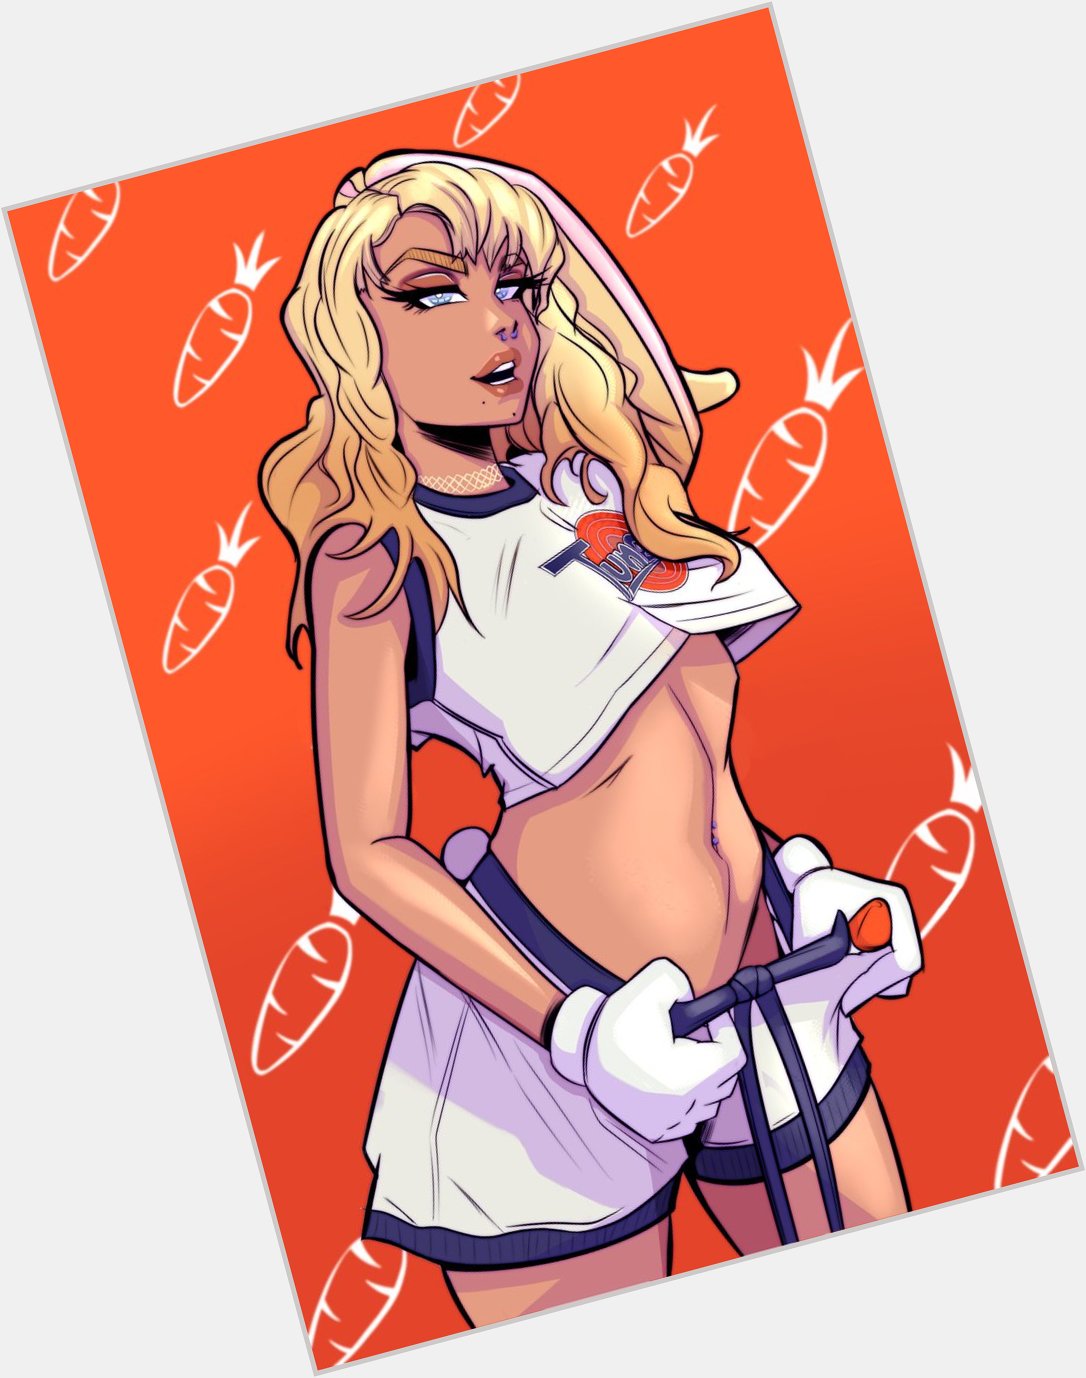 Happy Birthday  ,had to draw another Lola Bunny fanart for this special day  